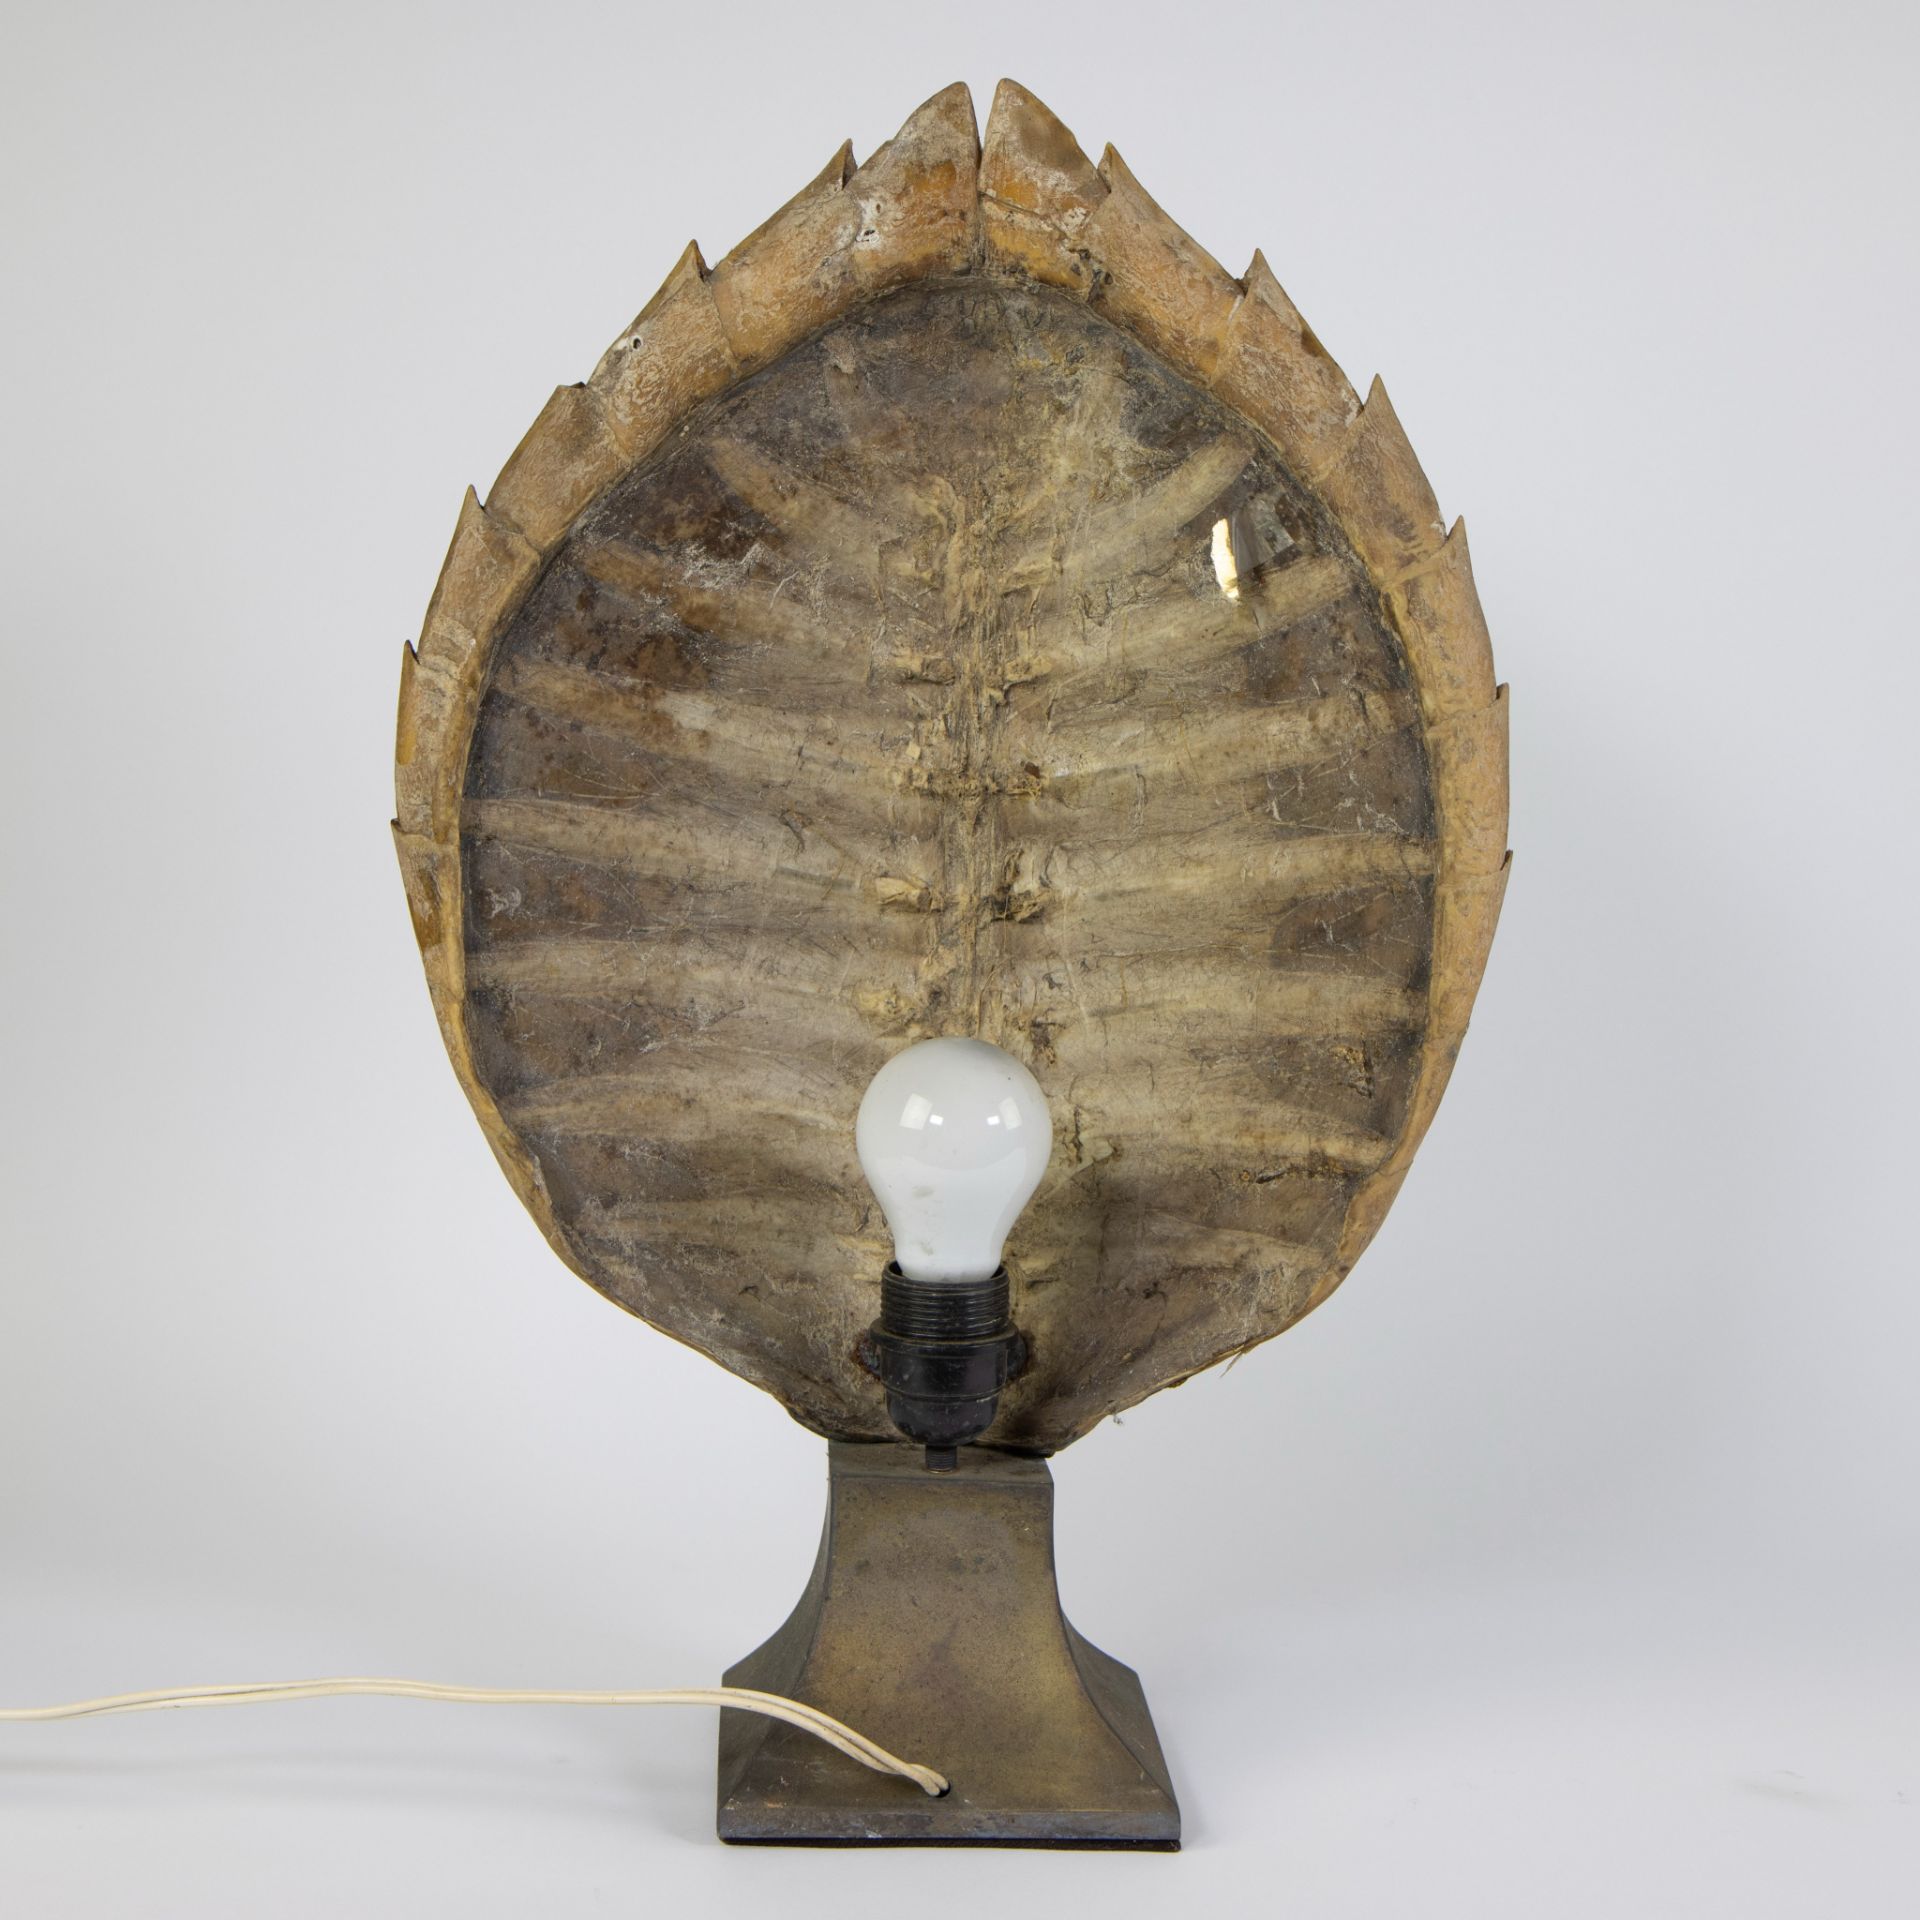 Shell of a turtle transformed into a lampadaire - Image 3 of 4